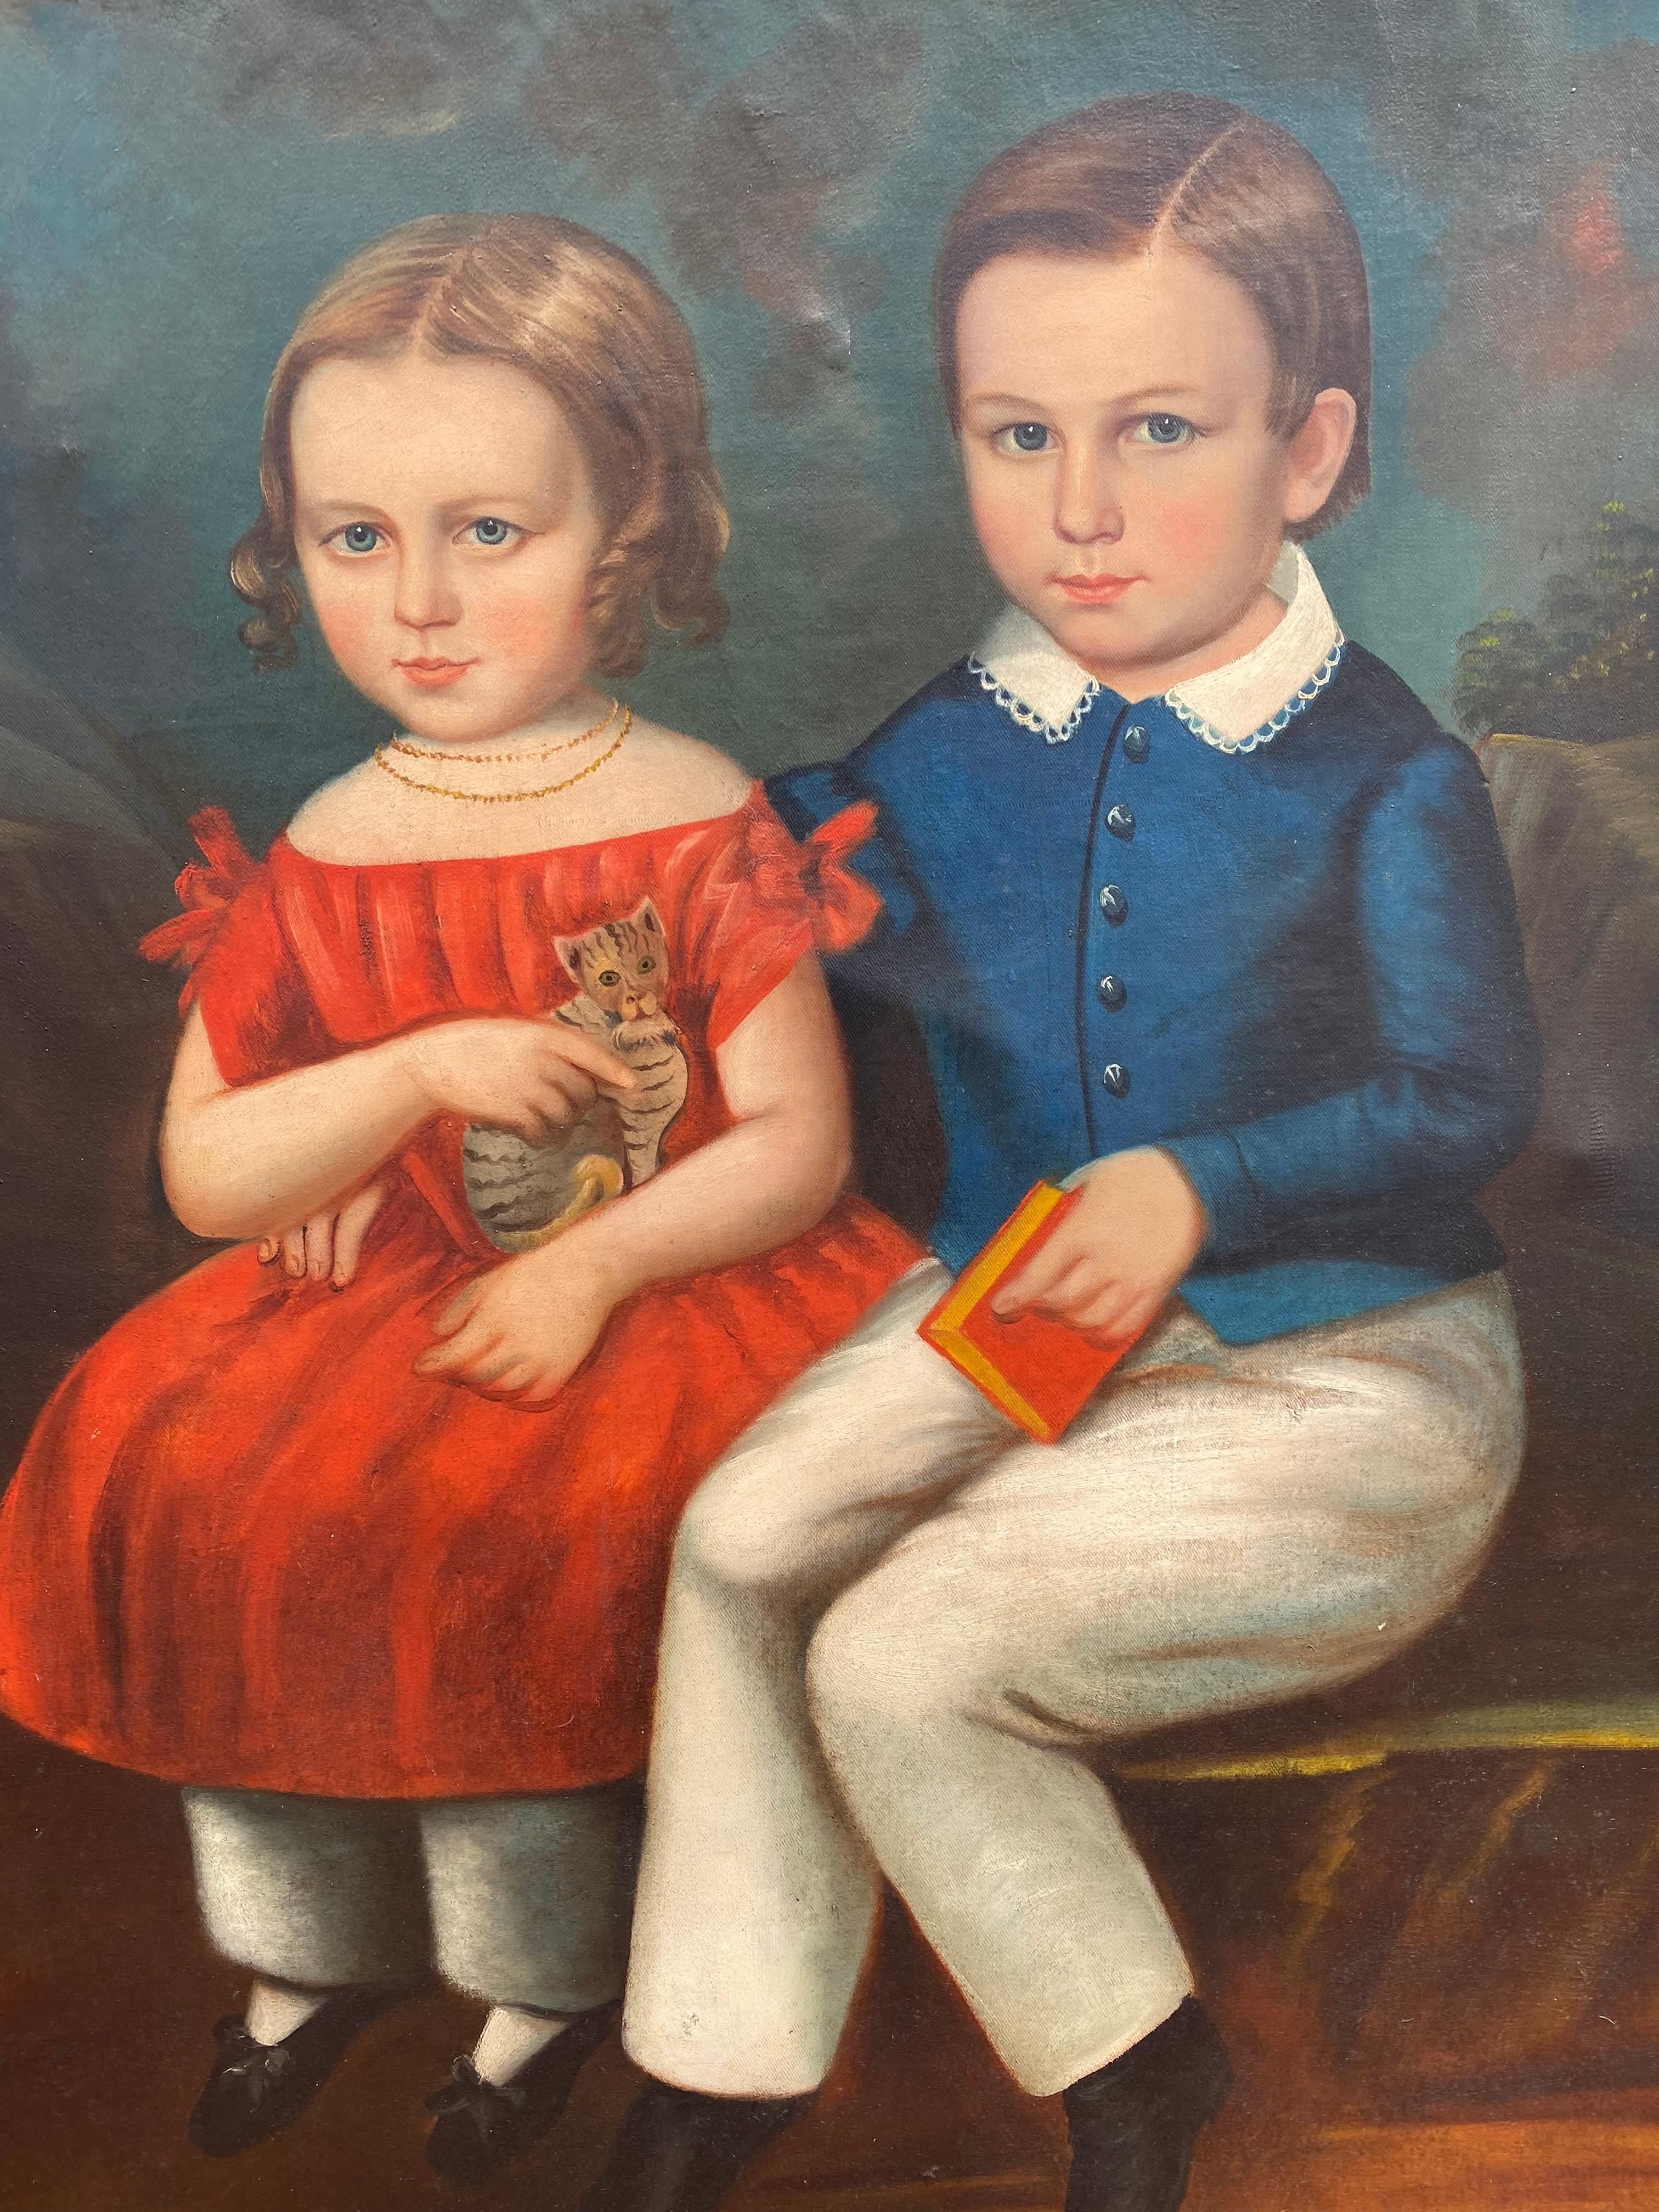 
Beautiful original oil on canvas double portrait painting of a young boy and girl with cat (moist likely brother and sister) attributed to the hand of American artist, John Carlin.  Double portraits are a rarity and this particular one is a superb